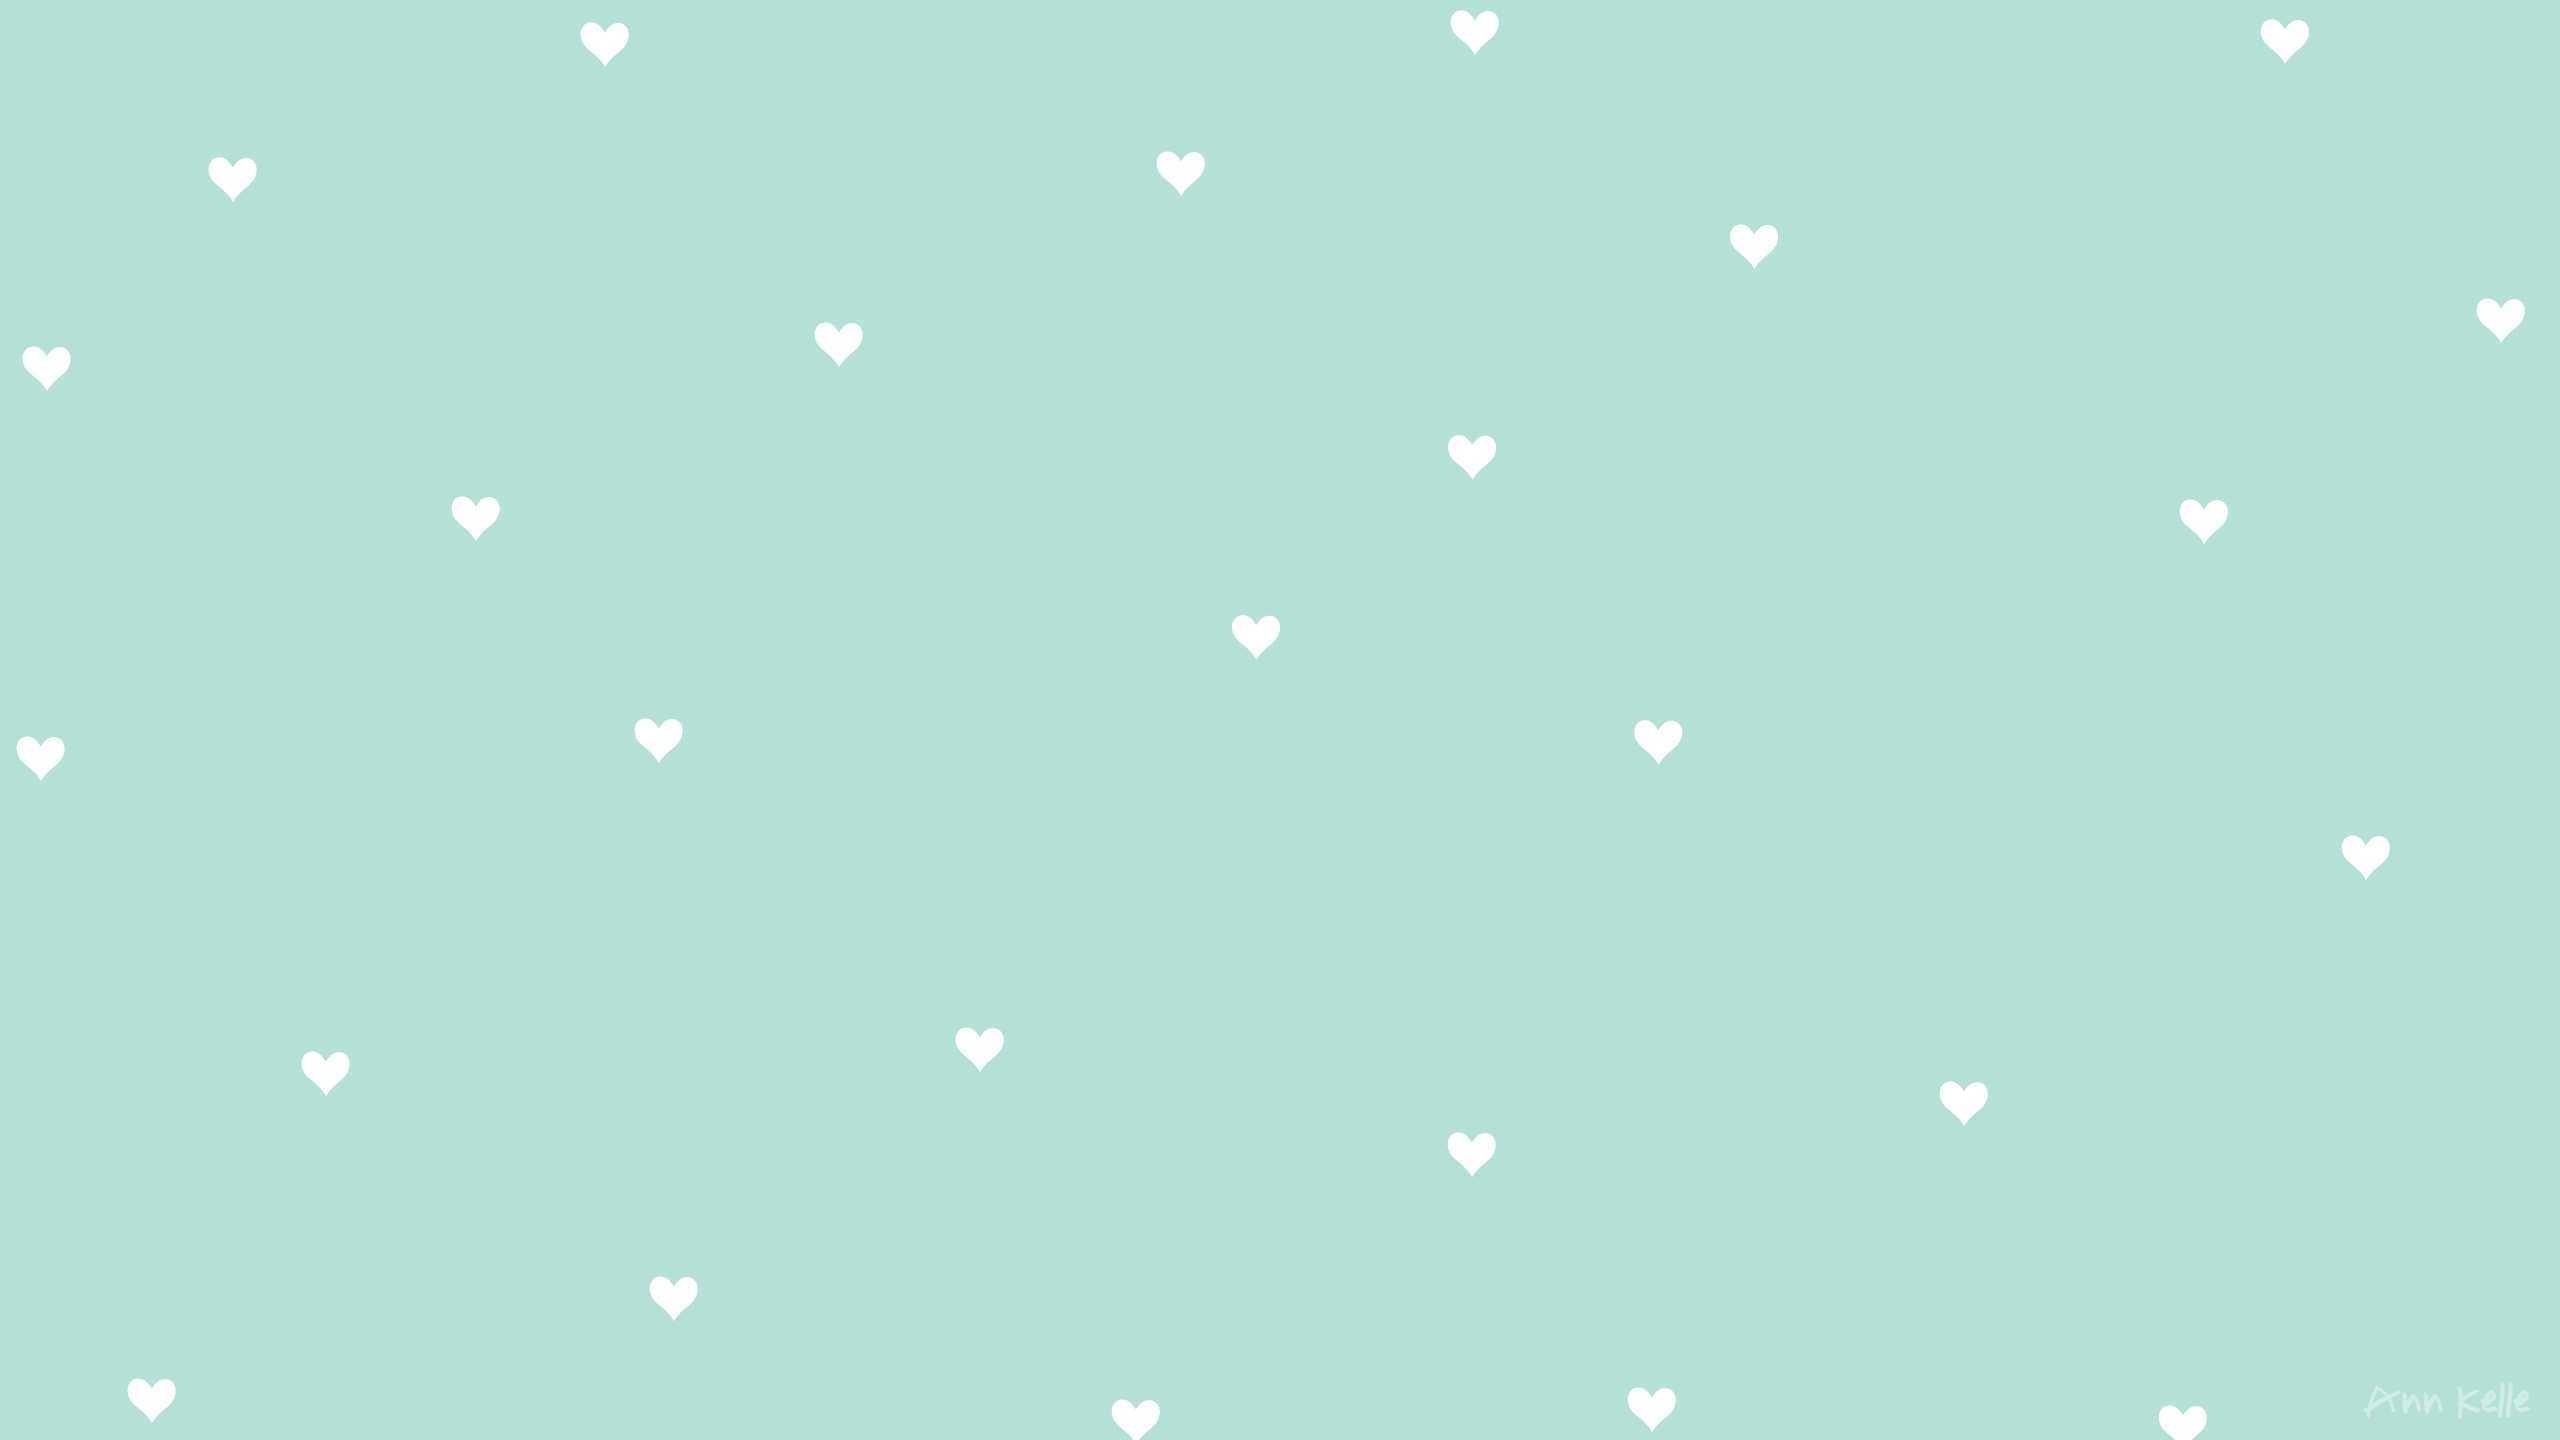 Pastel Green Aesthetic Wallpapers - Wallpaper Cave